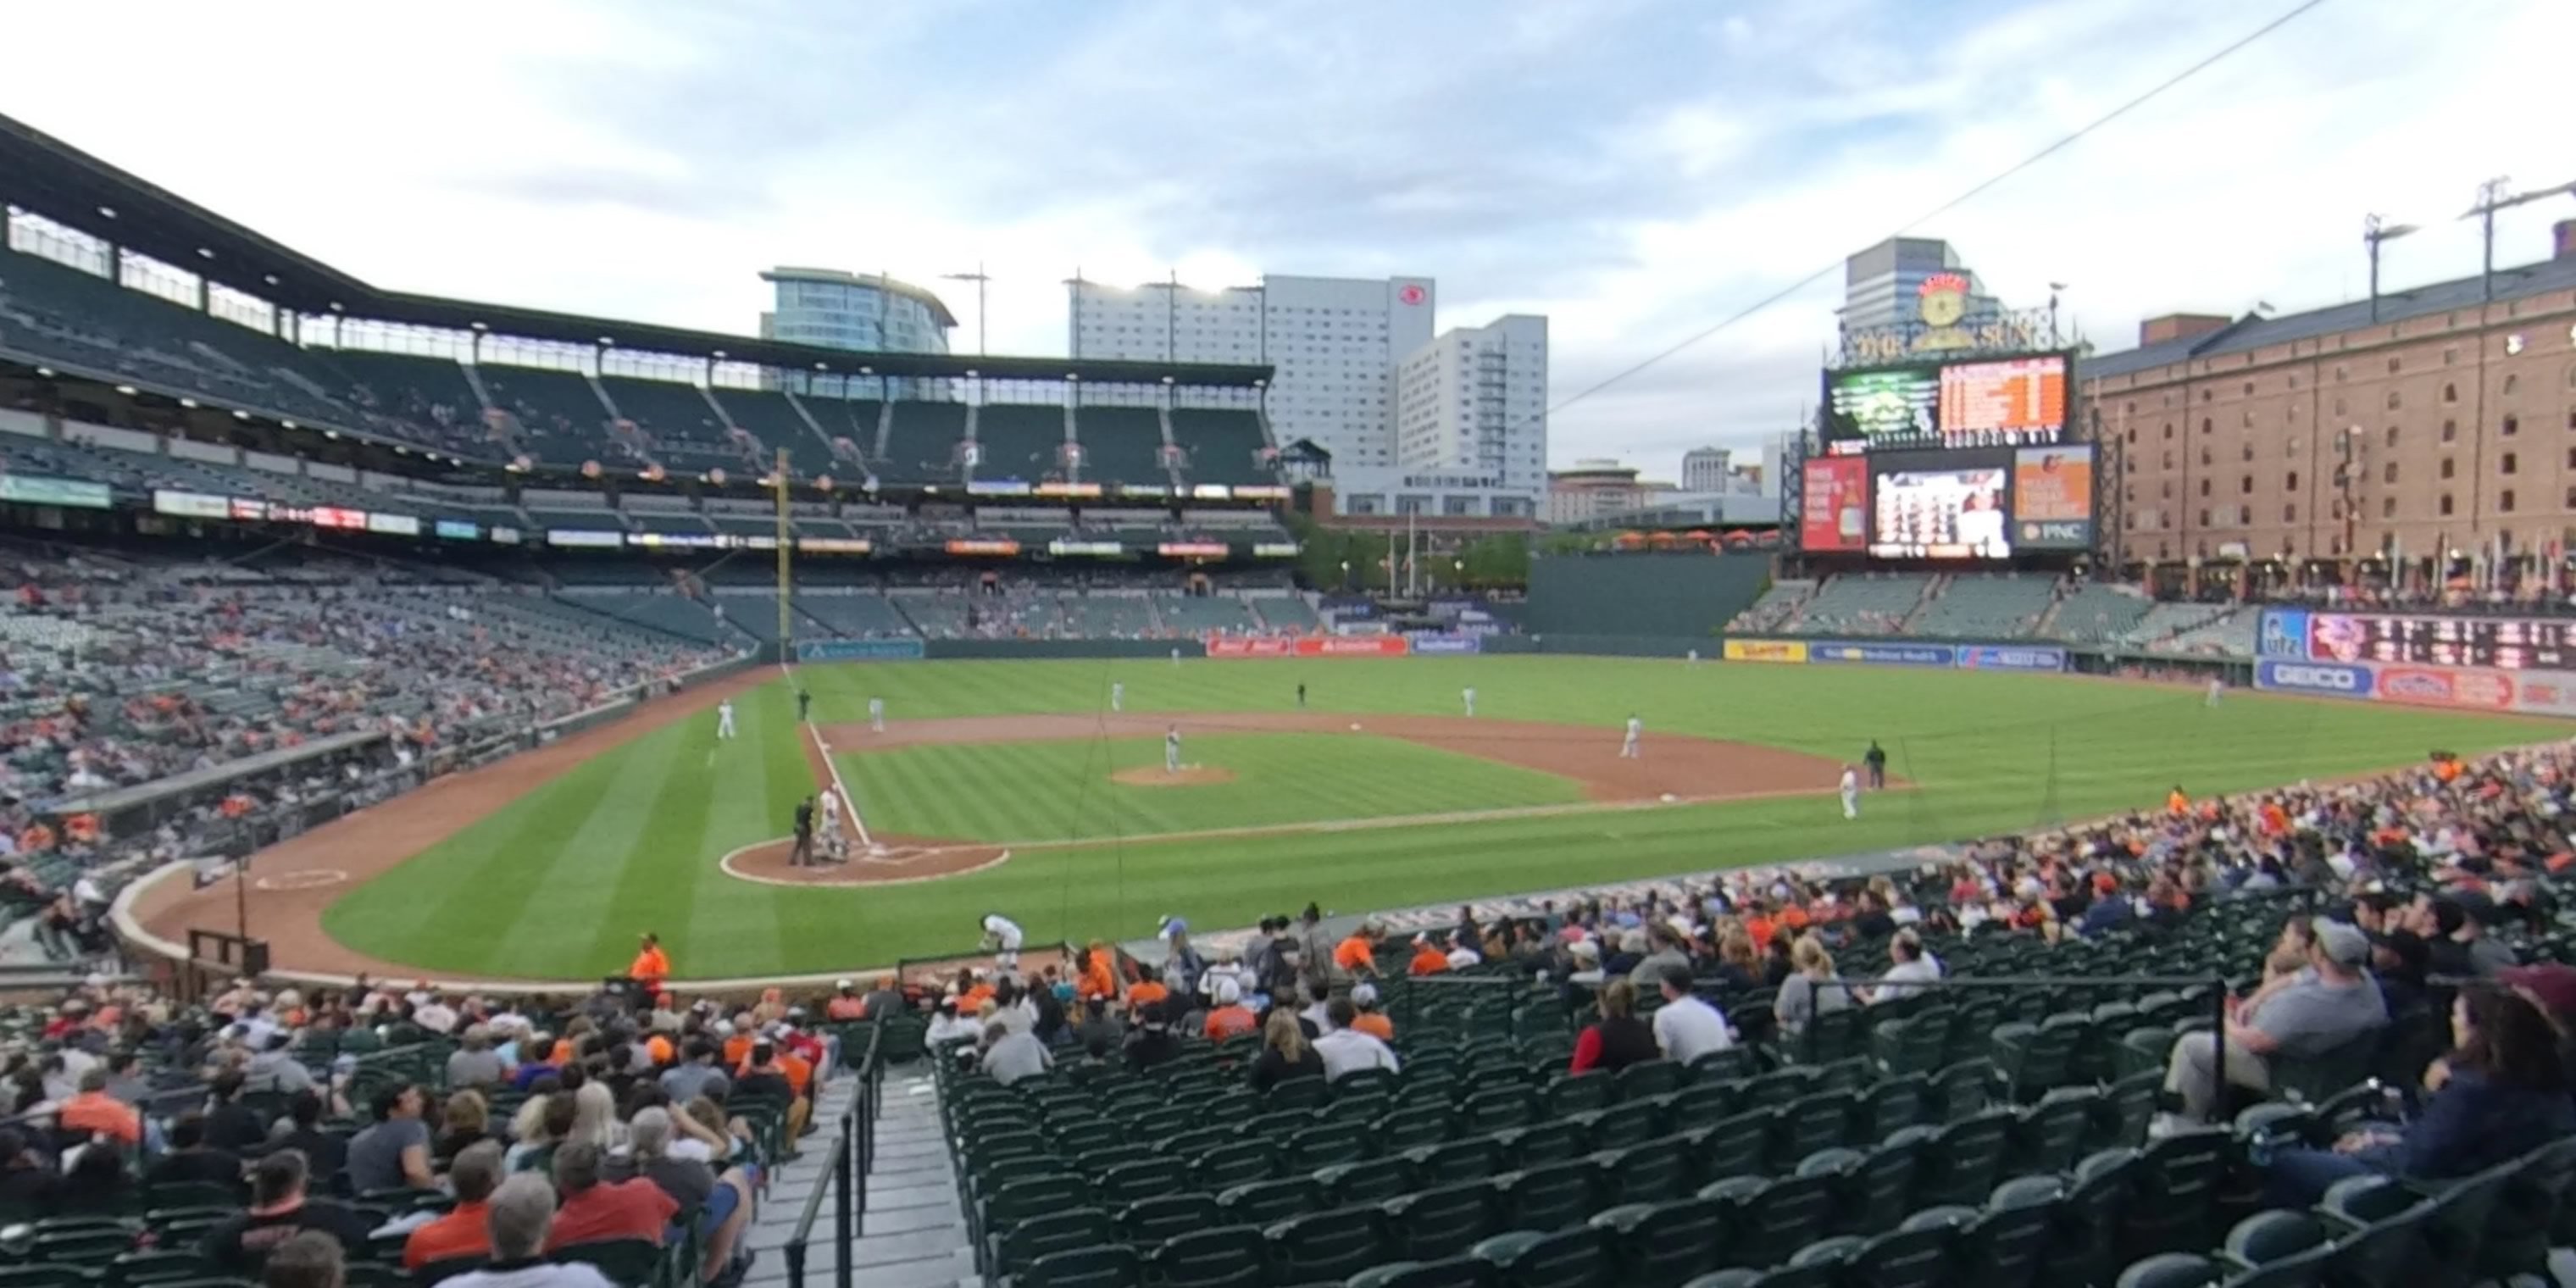 section 28 panoramic seat view  - oriole park